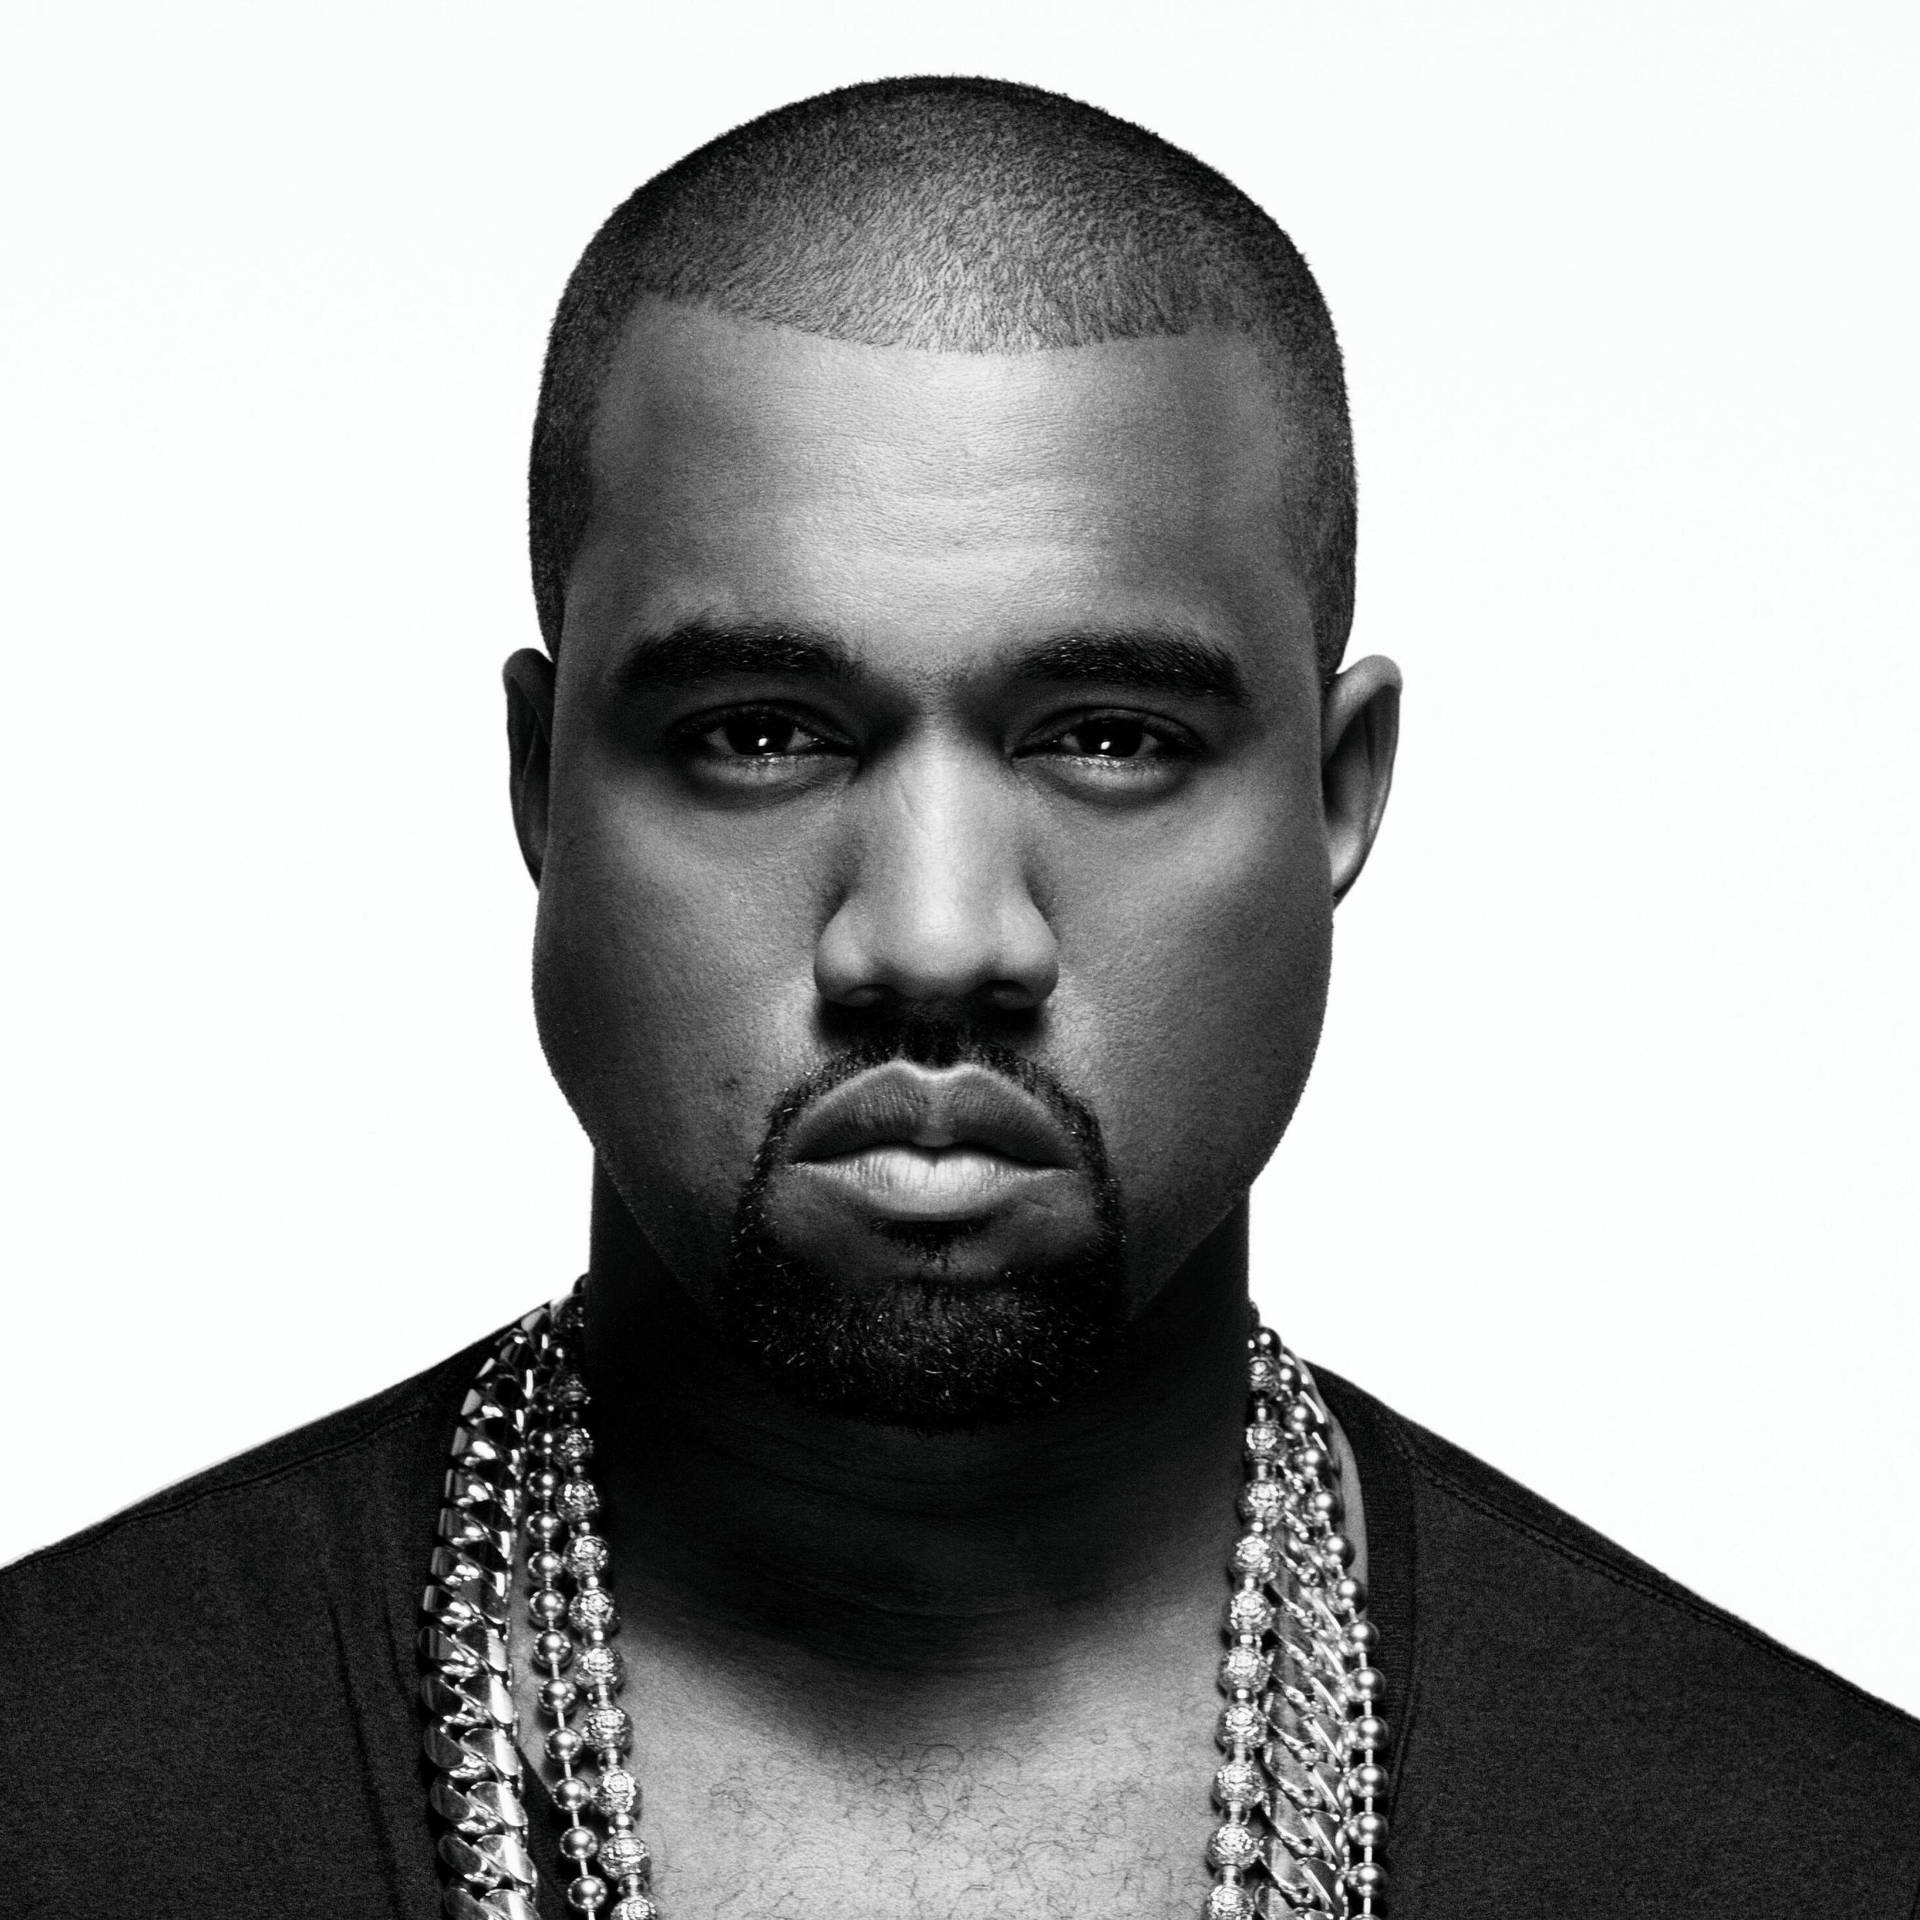 Free Kanye West Android Wallpaper Downloads, Kanye West Android Wallpaper for FREE